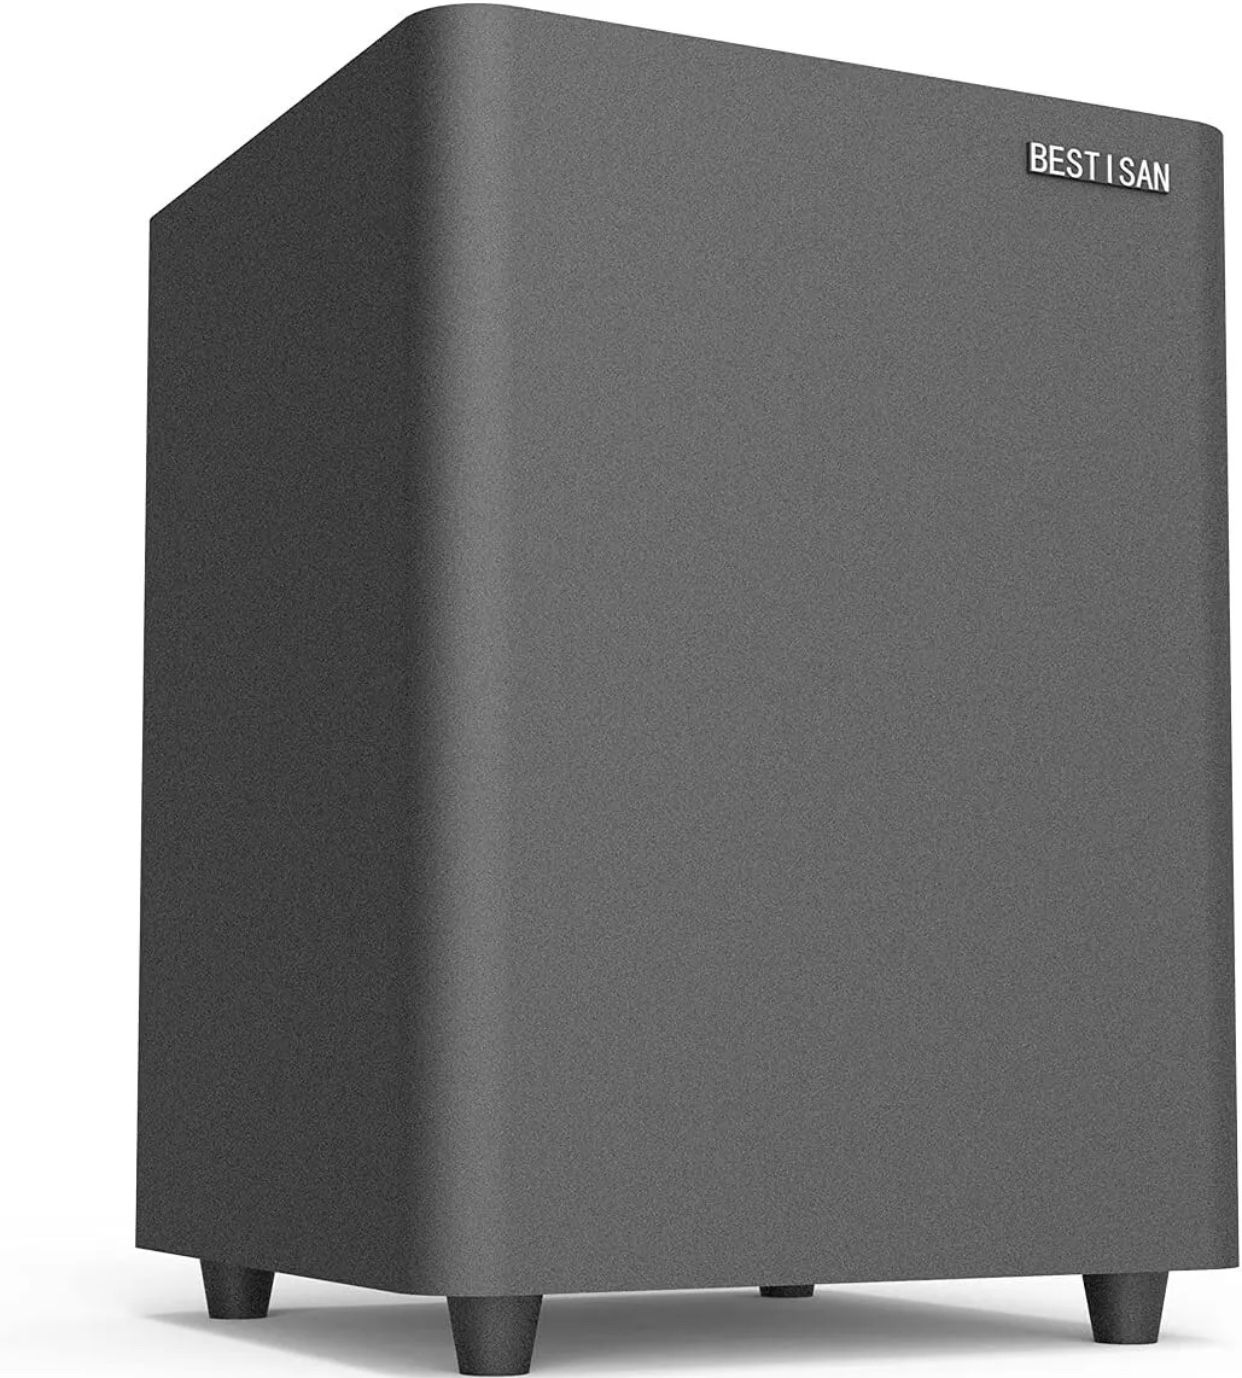 BESTISAN 6.5’’ Subwoofer, Powered Home Audio Sub woofer with Deep Bass SW65C